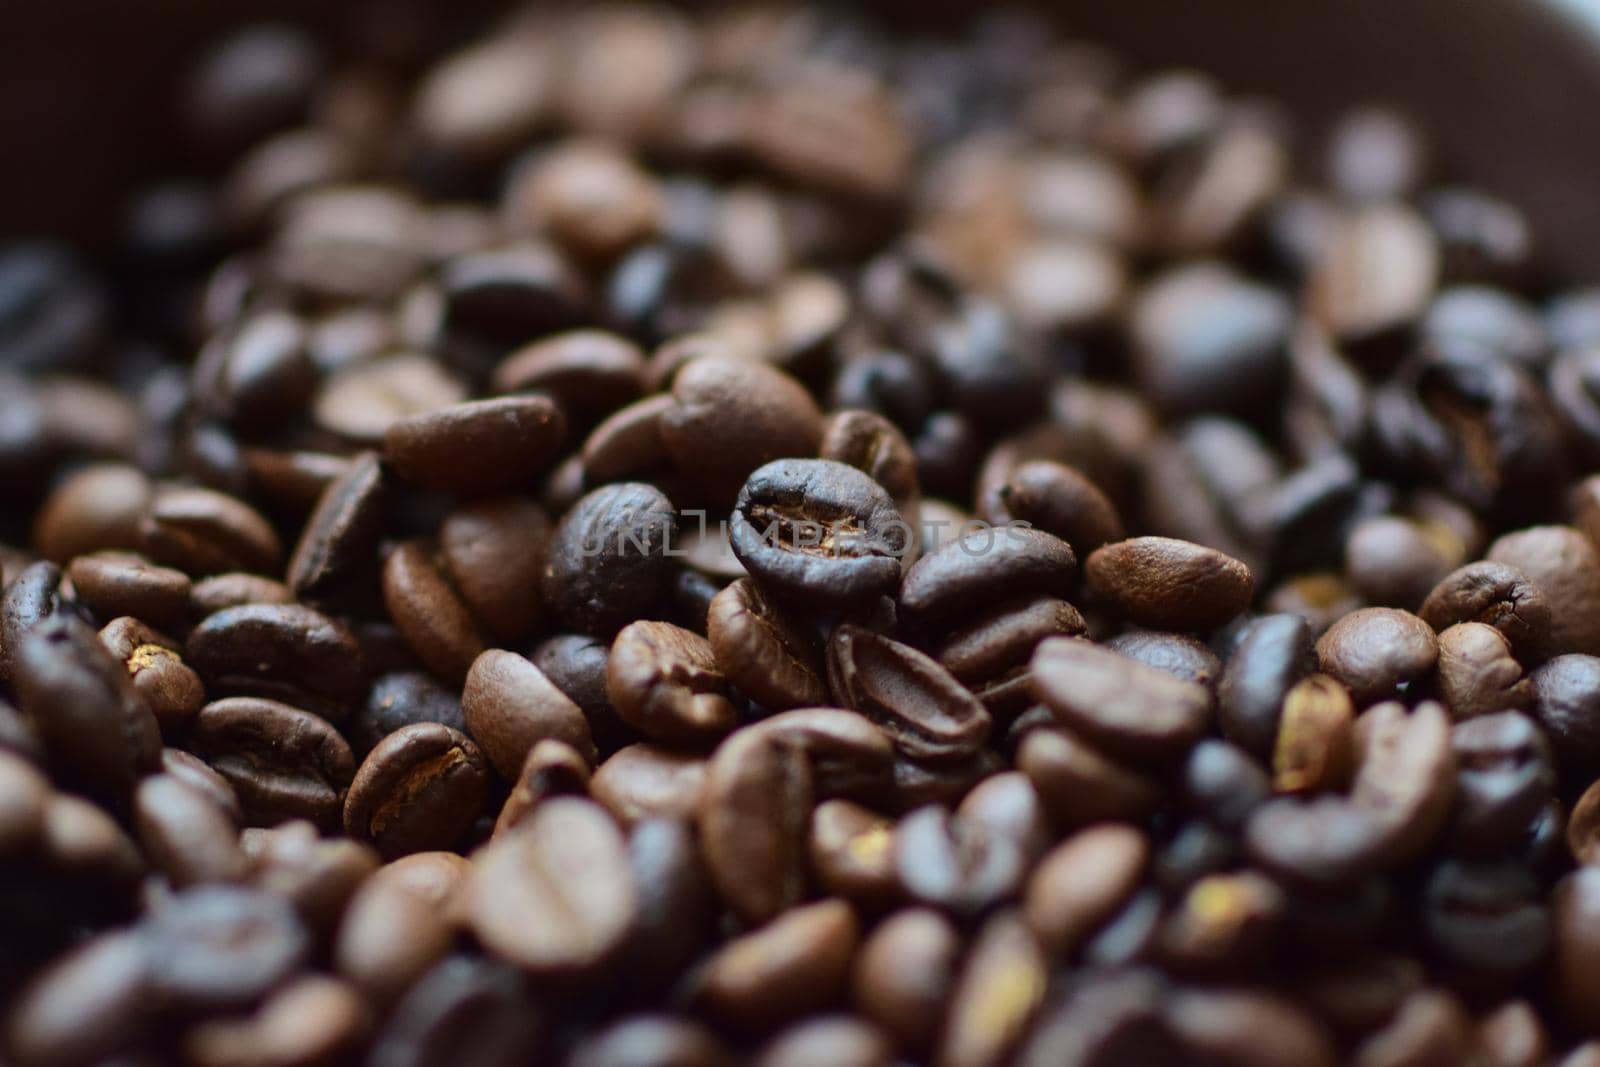 Roasted coffee beans as a close up by Luise123